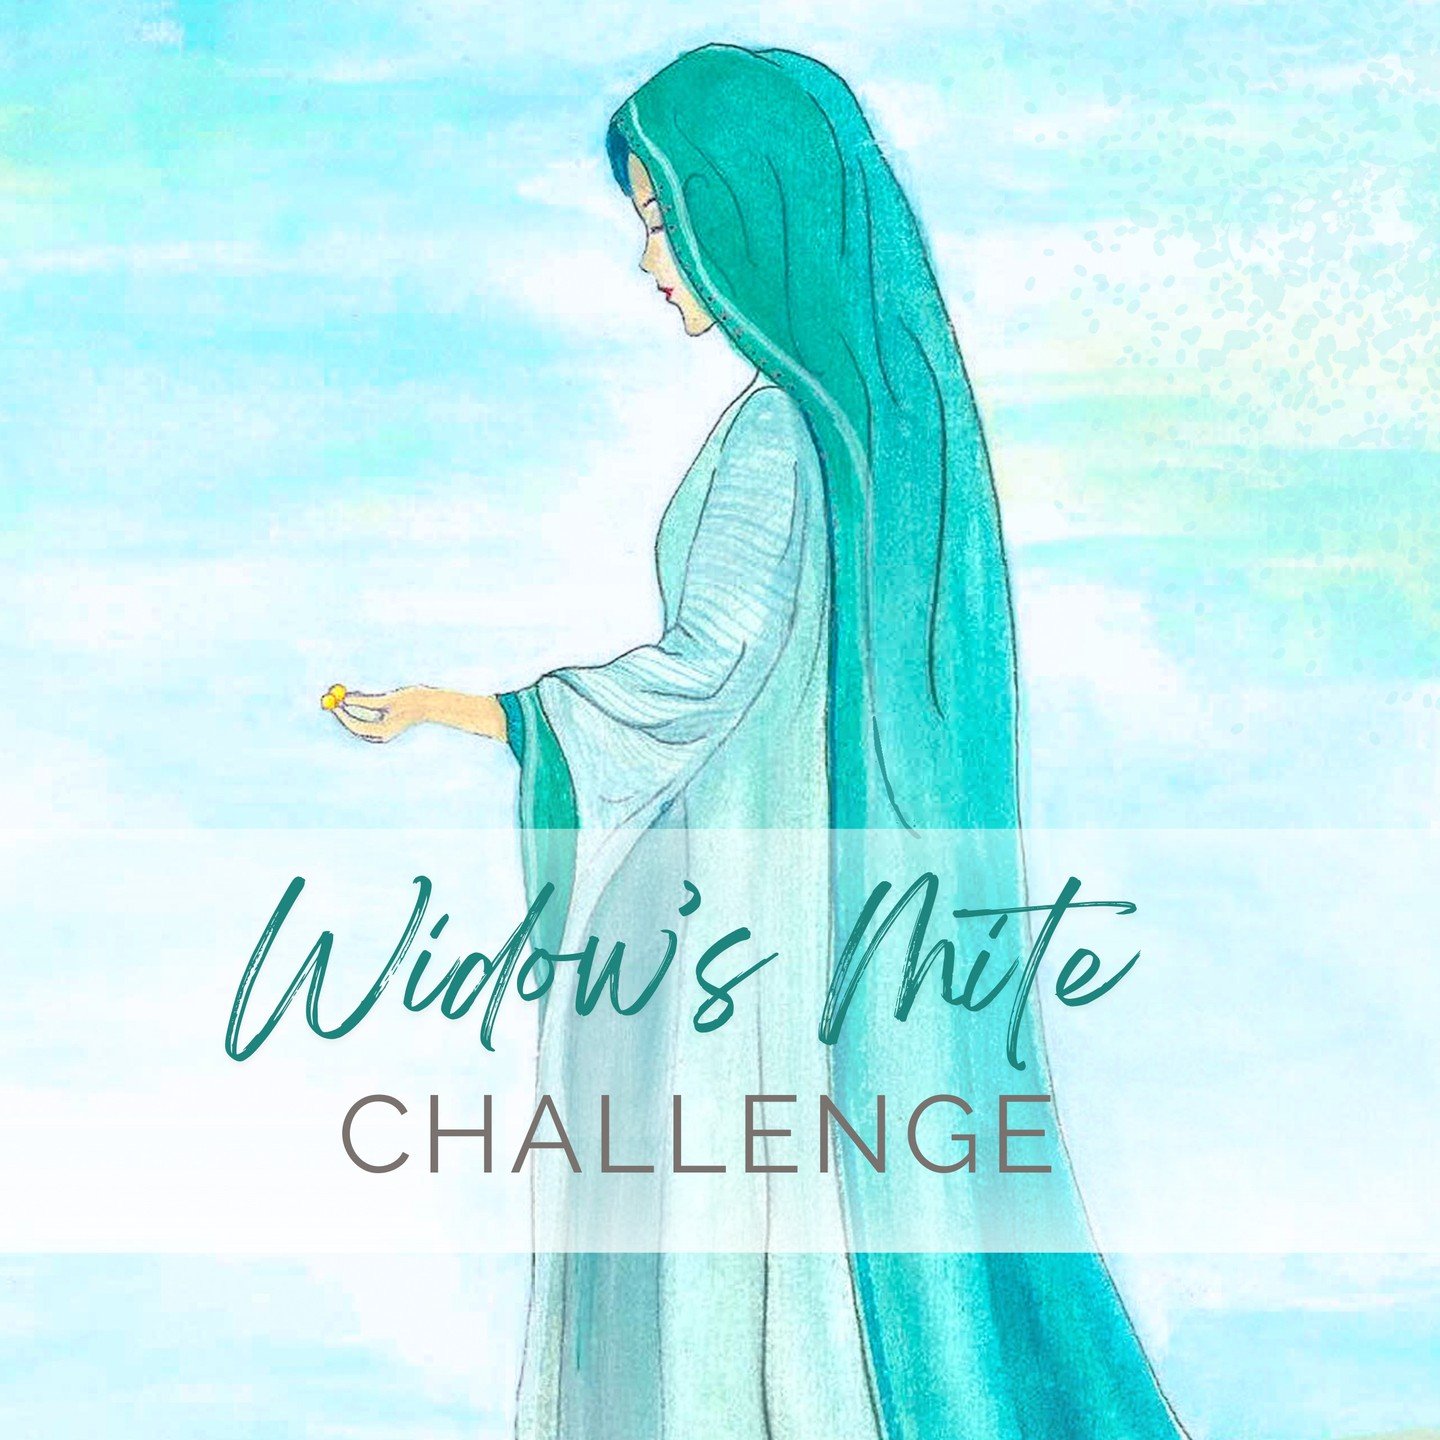 Just ONE more donor needed and just three days left for this Widow's Mite challenge!! Read about the challenge in the link in our bio, and share to your stories to let friends know who might want to be that LAST PERSON to give just $2! 🪙 🪙